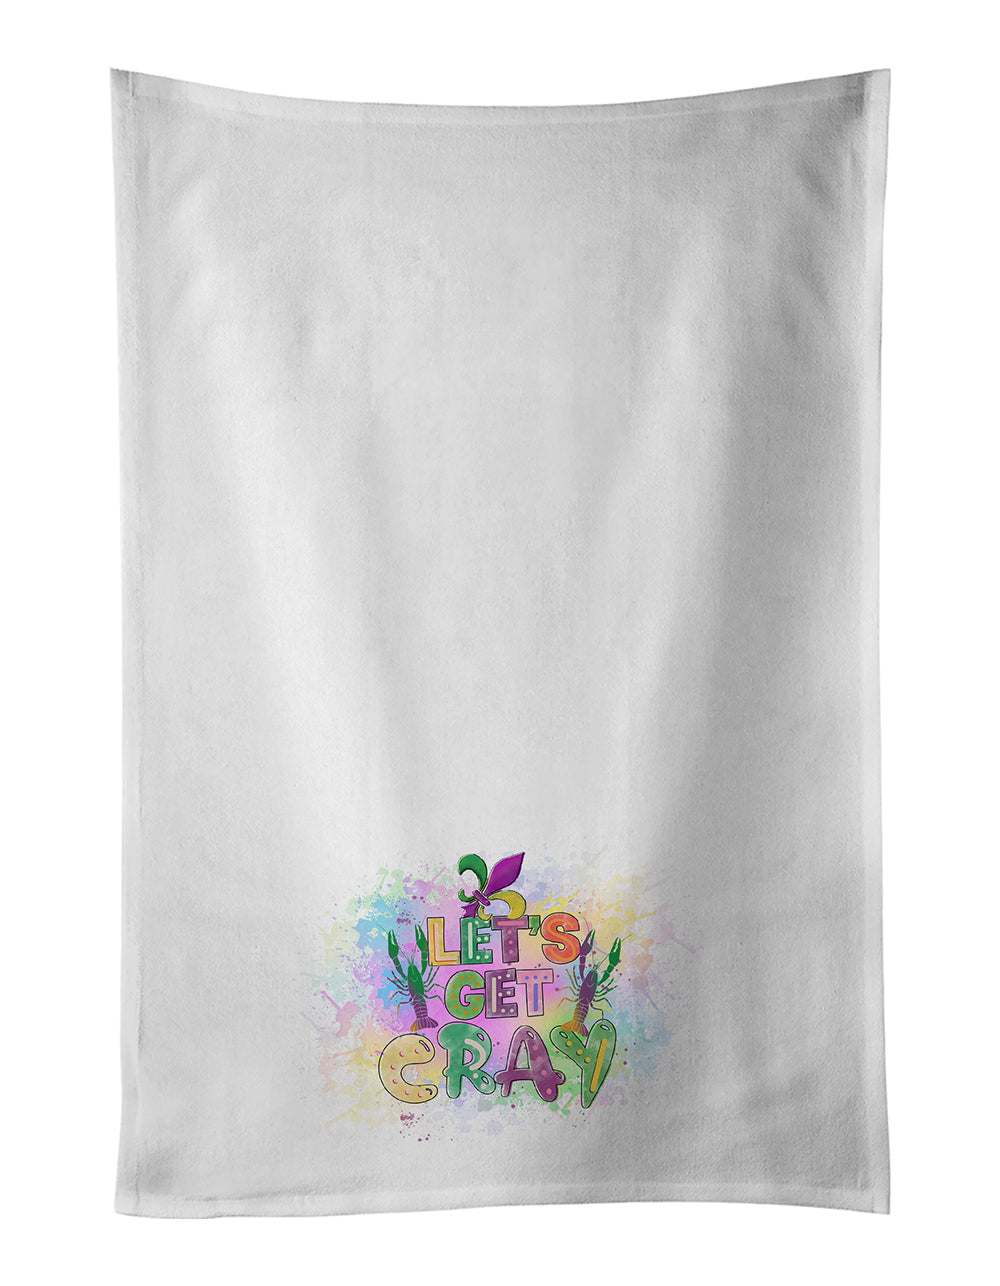 Buy this Let's Get Cray Mardi Gras White Kitchen Towel Set of 2 Dish Towels